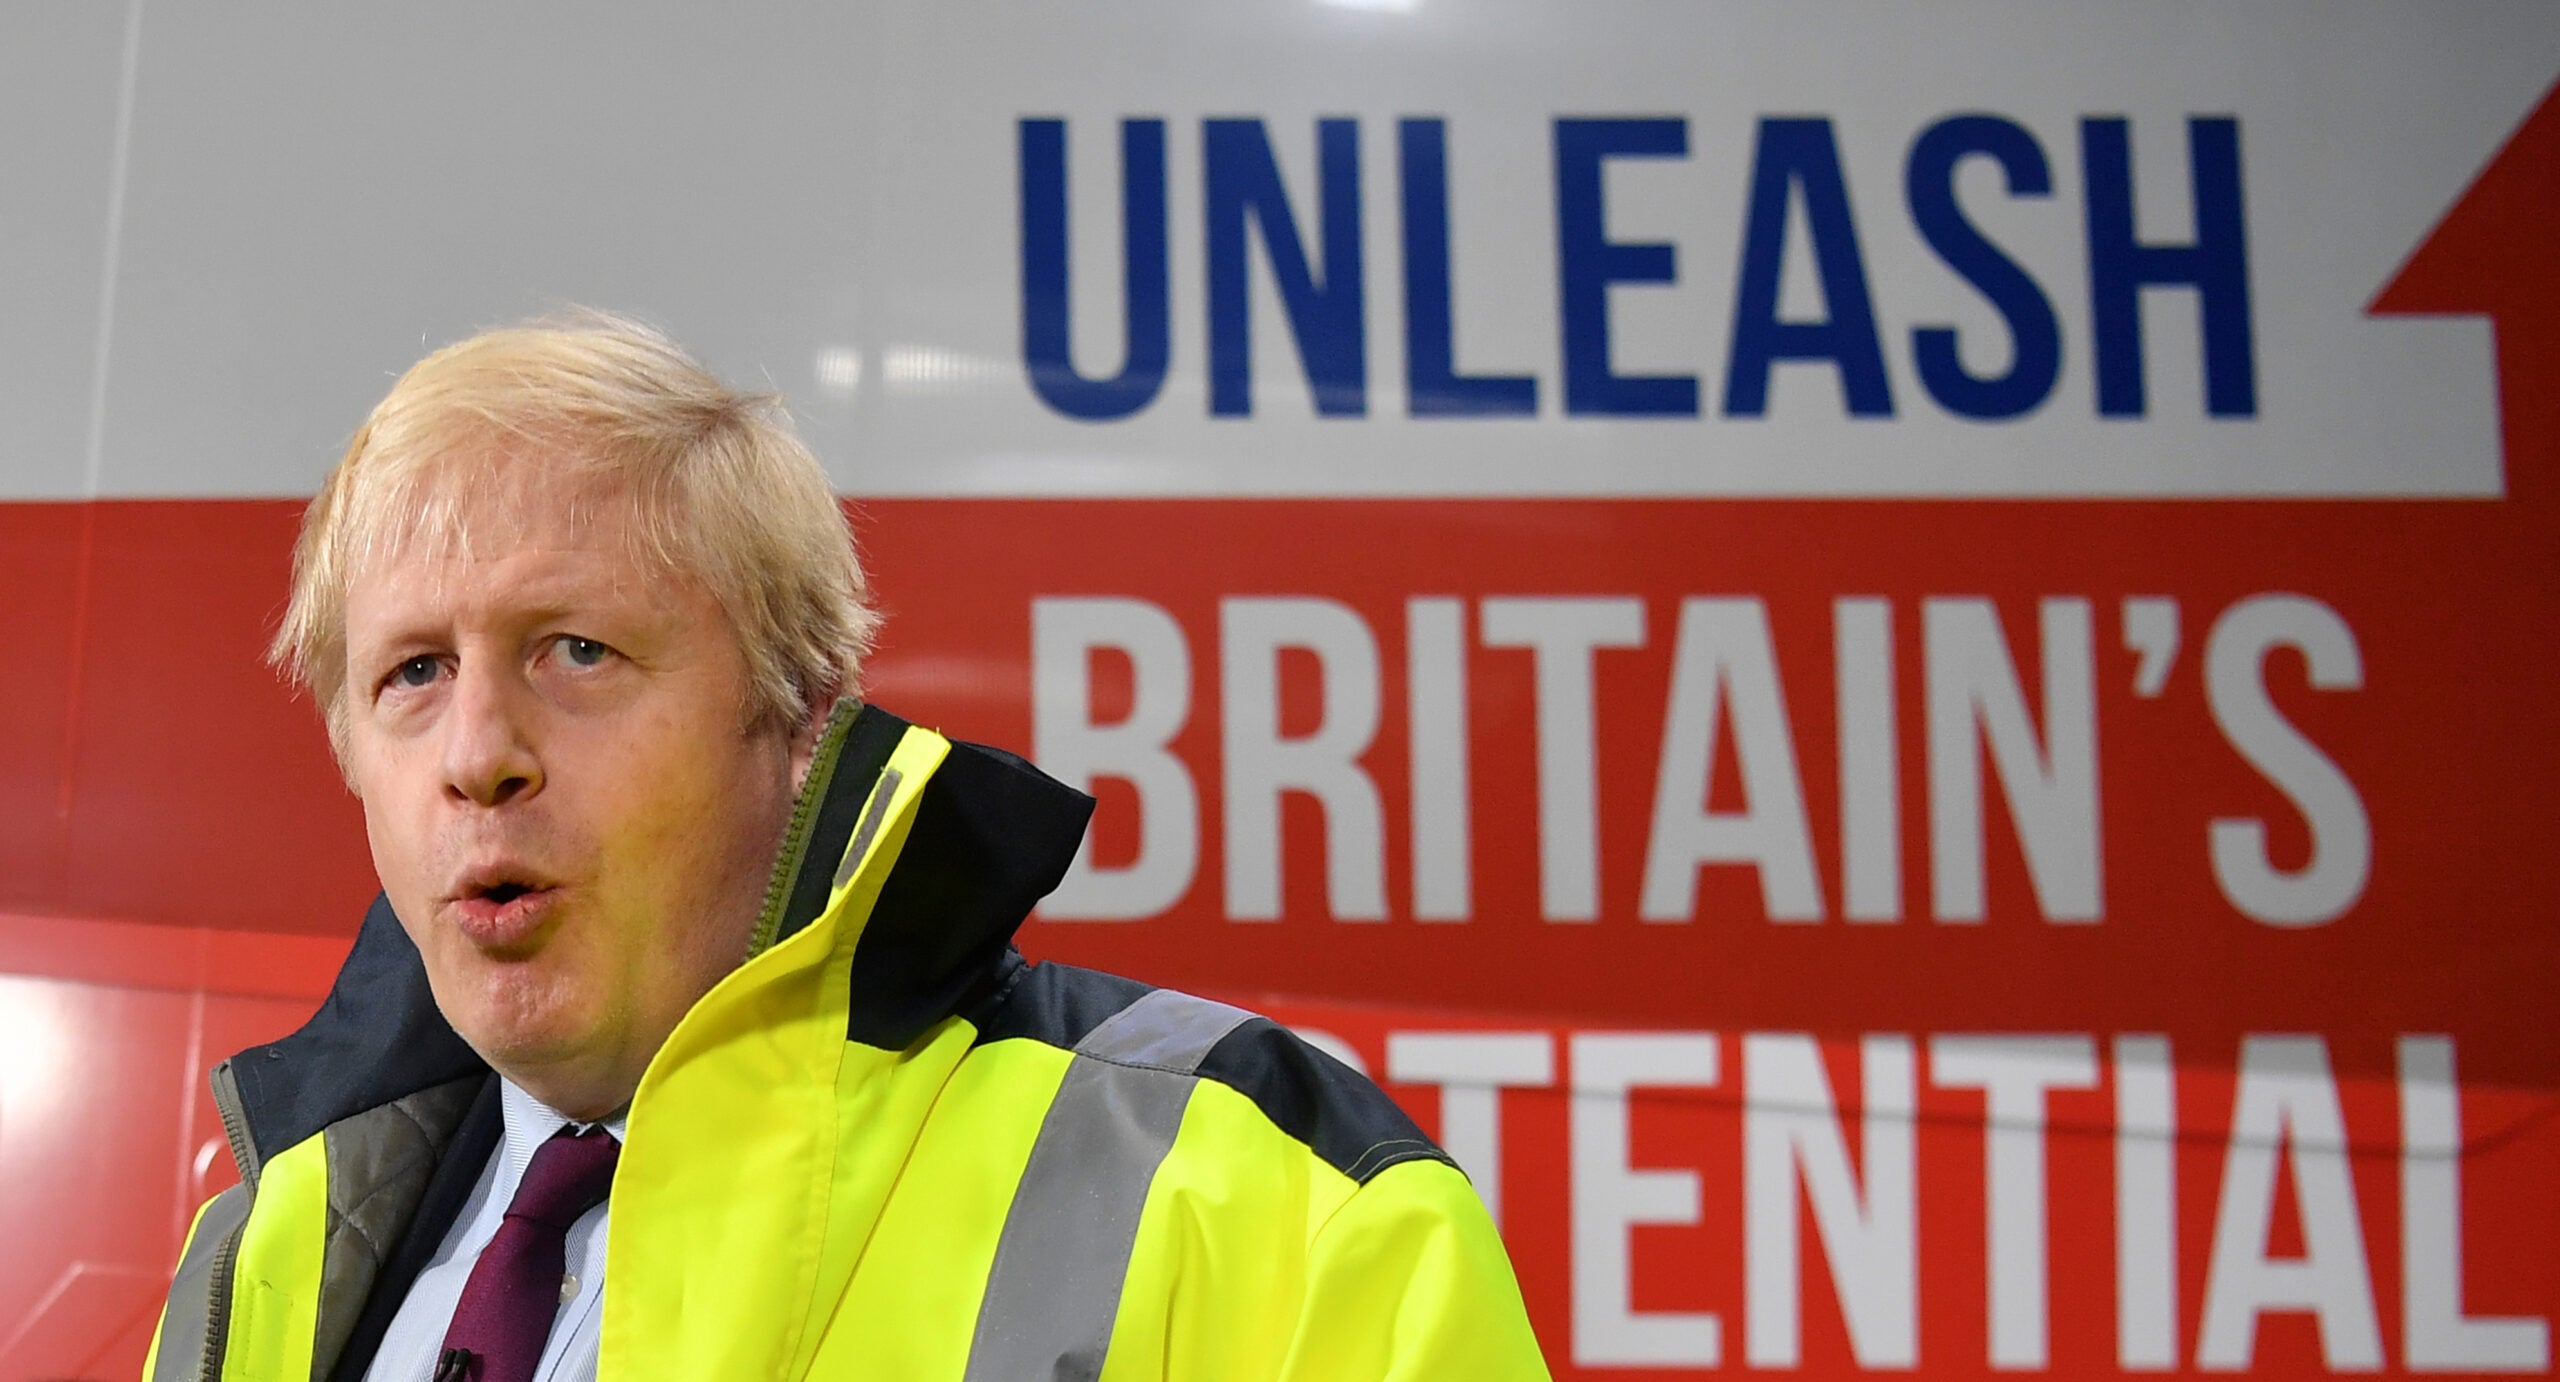 Boris Johnson’s attack on EU citizens shows the Tories don’t think migrants belong here